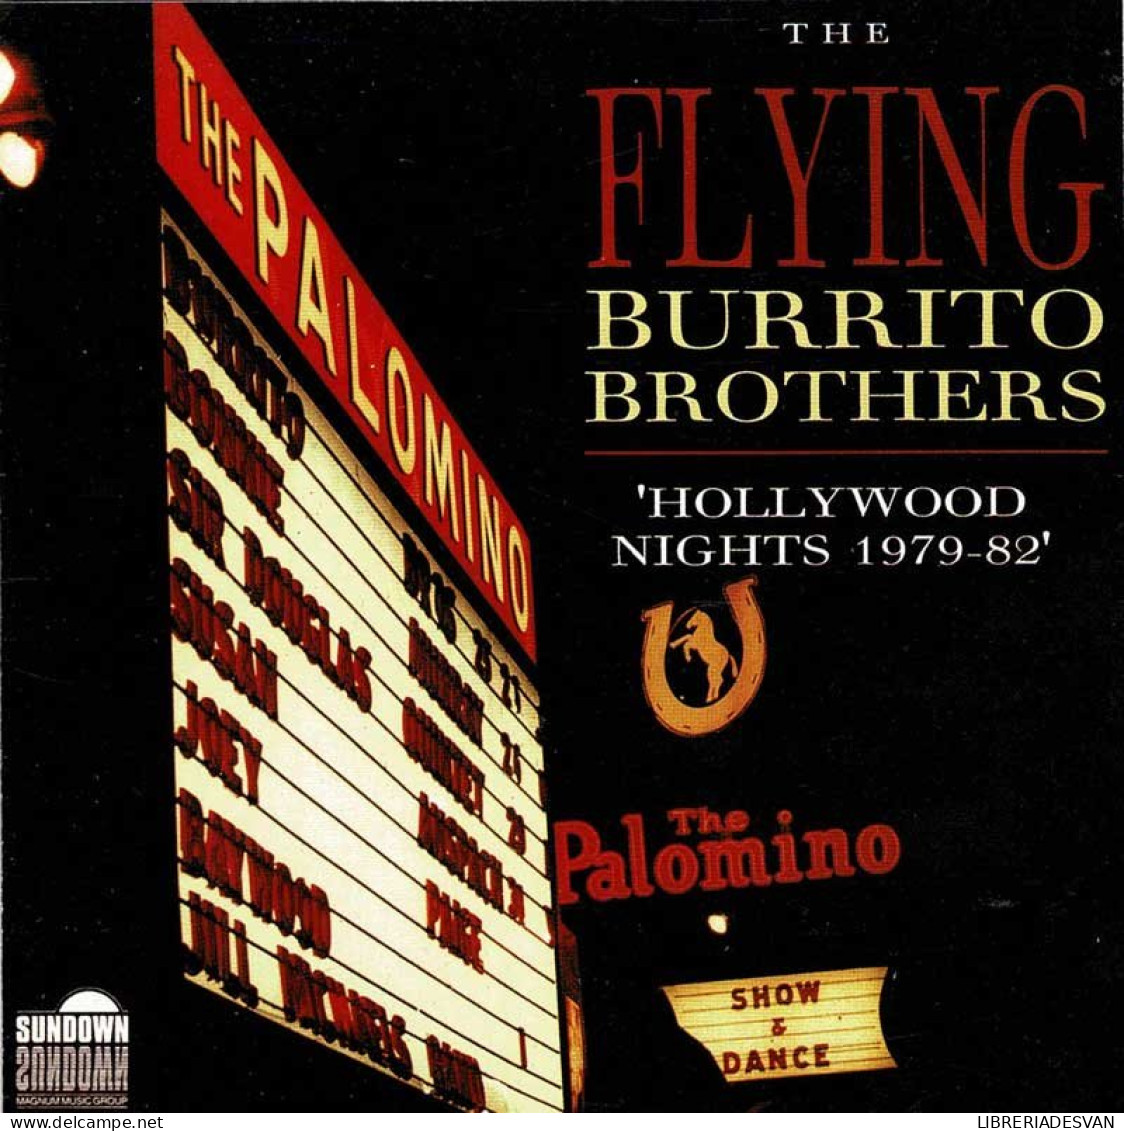 The Flying Burrito Brothers - Hollywood Nights 1979-82. CD - Country & Folk